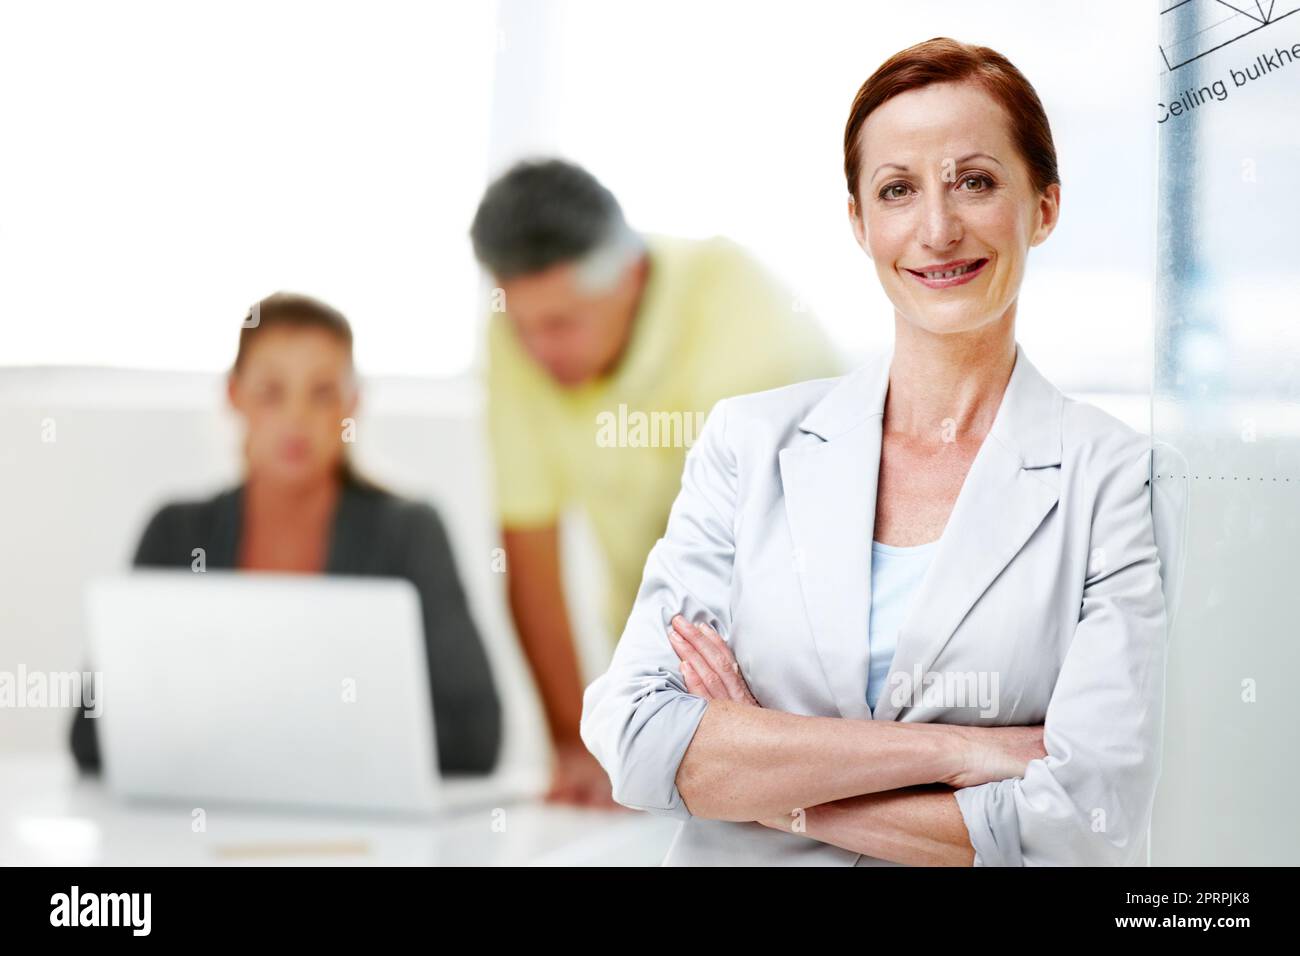 Shes an expert in the architectural field. A mature female architect standing confidently with her colleagues in the background. Stock Photo